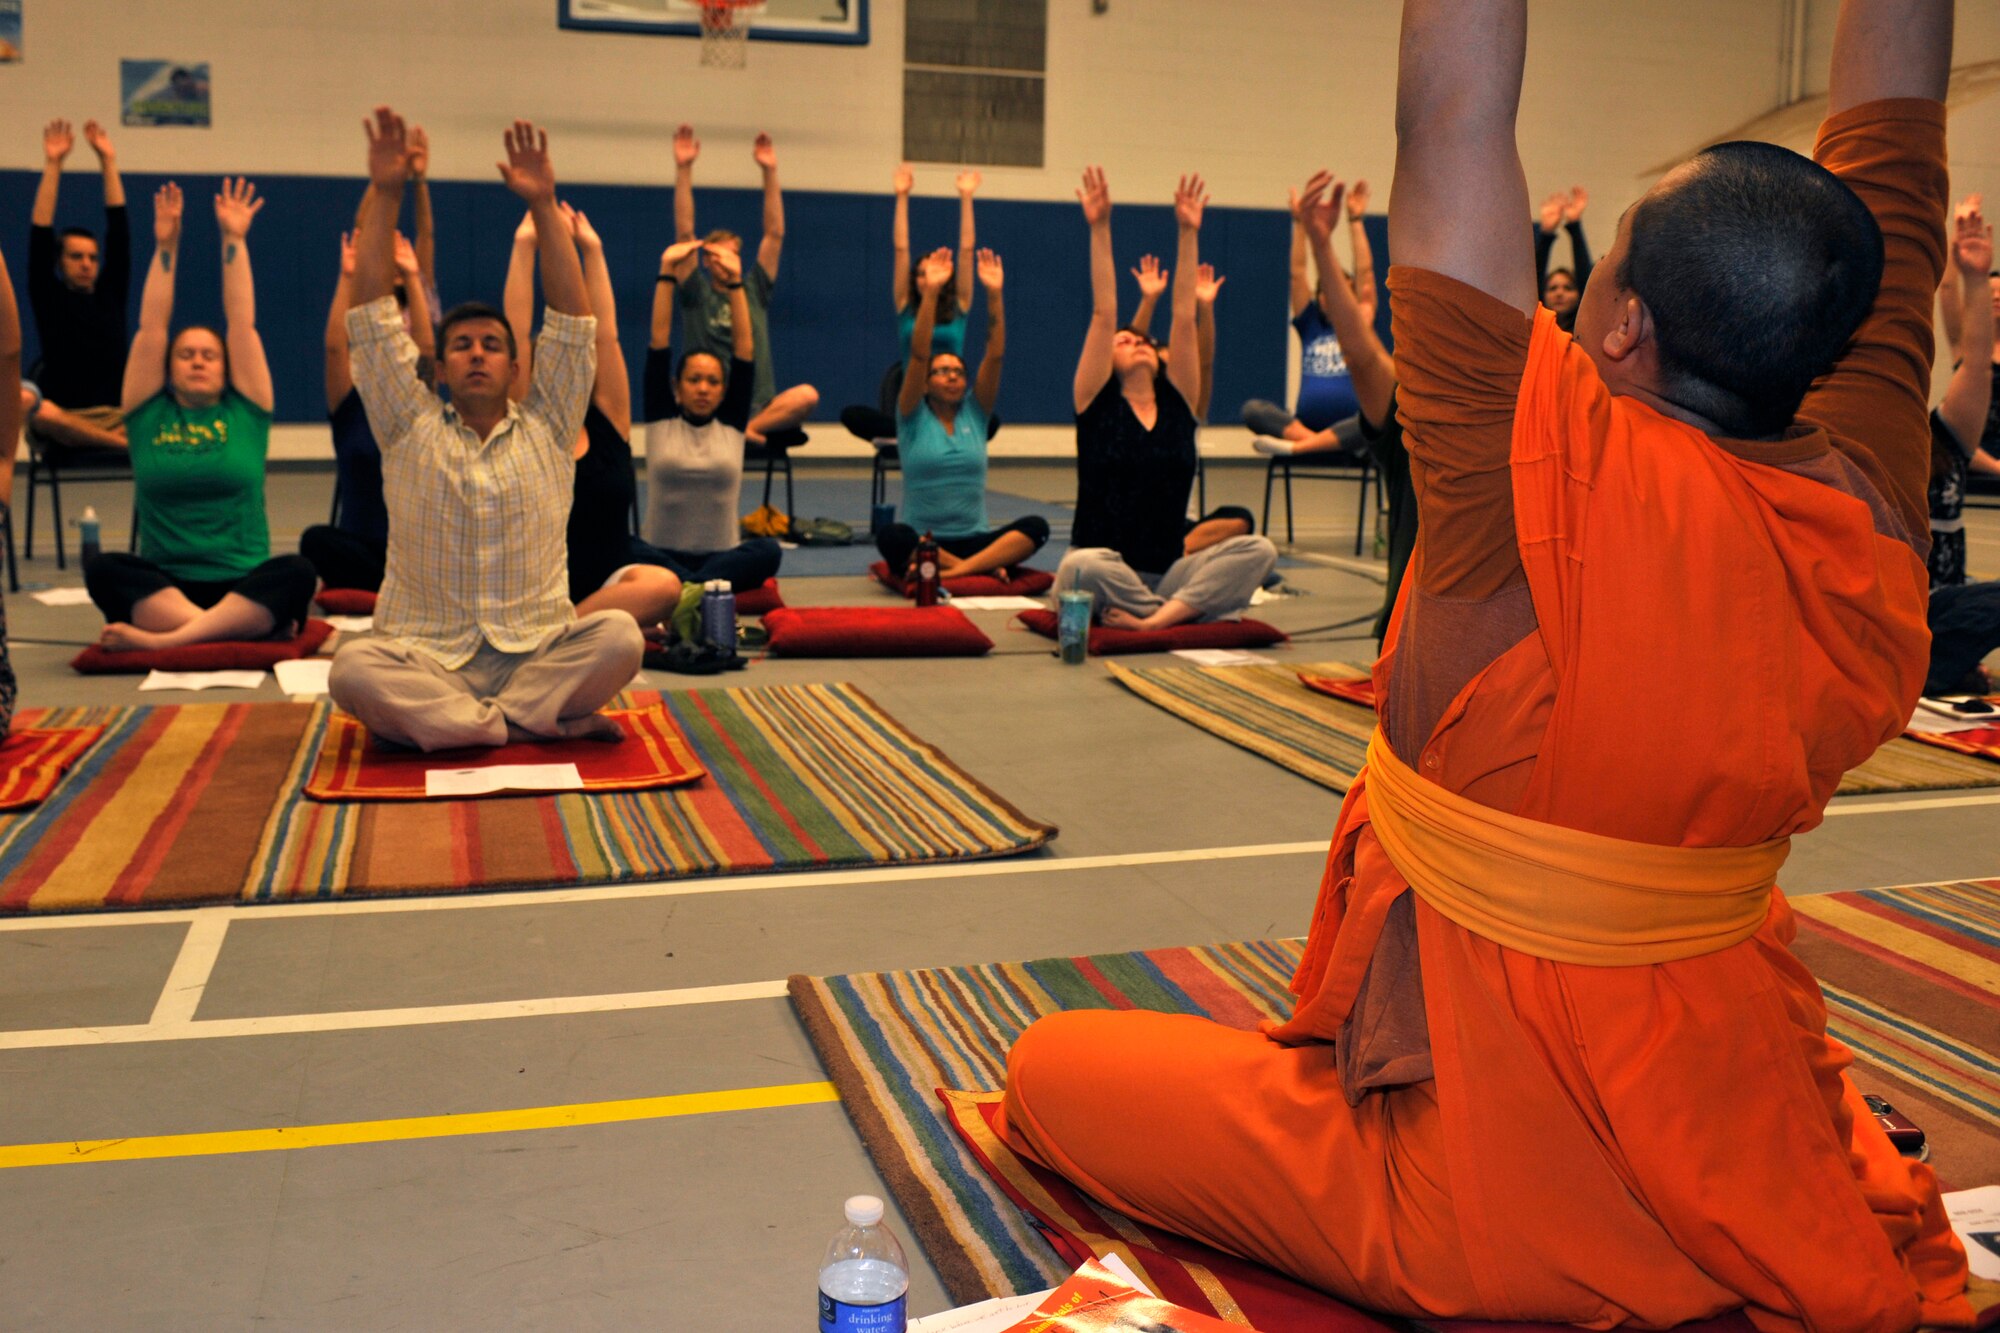 Buddhist monk Ajasn Anake leads a breathing exercise during a Buddhist meditation and yoga workshop at Cannon Air Force Base, N.M., July 8, 2012. The Base Chapel sponsored the workshop, which was held in the Youth Center and included a yoga session as well as a home-made lunch buffet. (U.S. Air Force photo by Airman 1st Class Ericka Engblom)